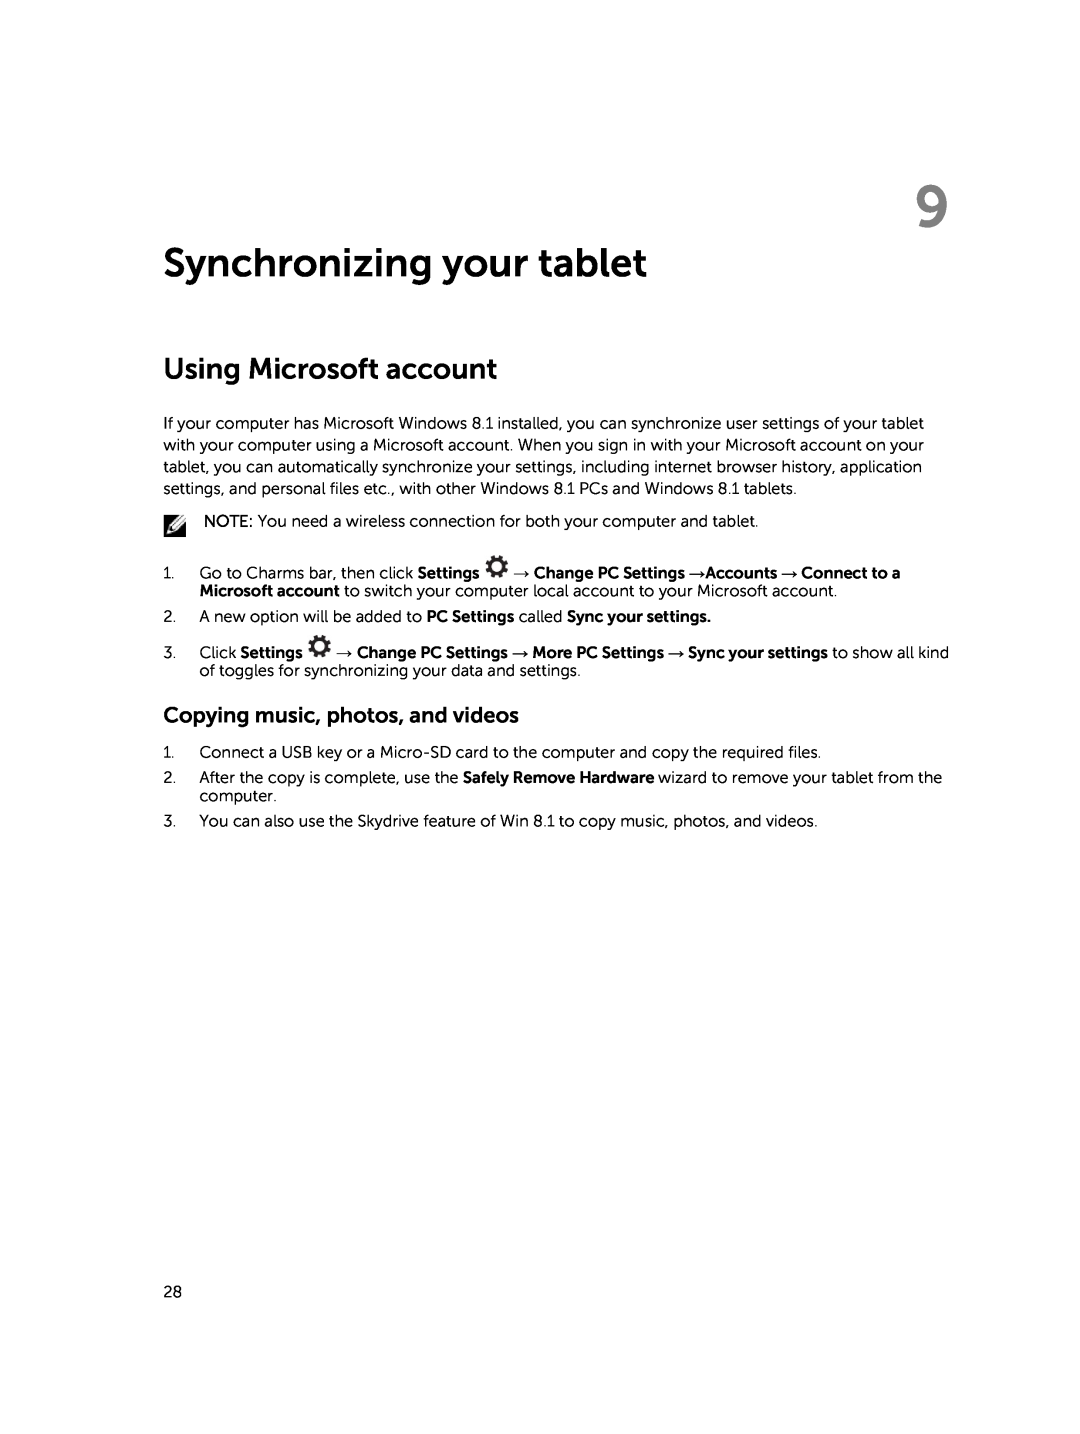 Dell 13-7350 manual Synchronizing your tablet, Using Microsoft account, Copying music, photos, and videos 